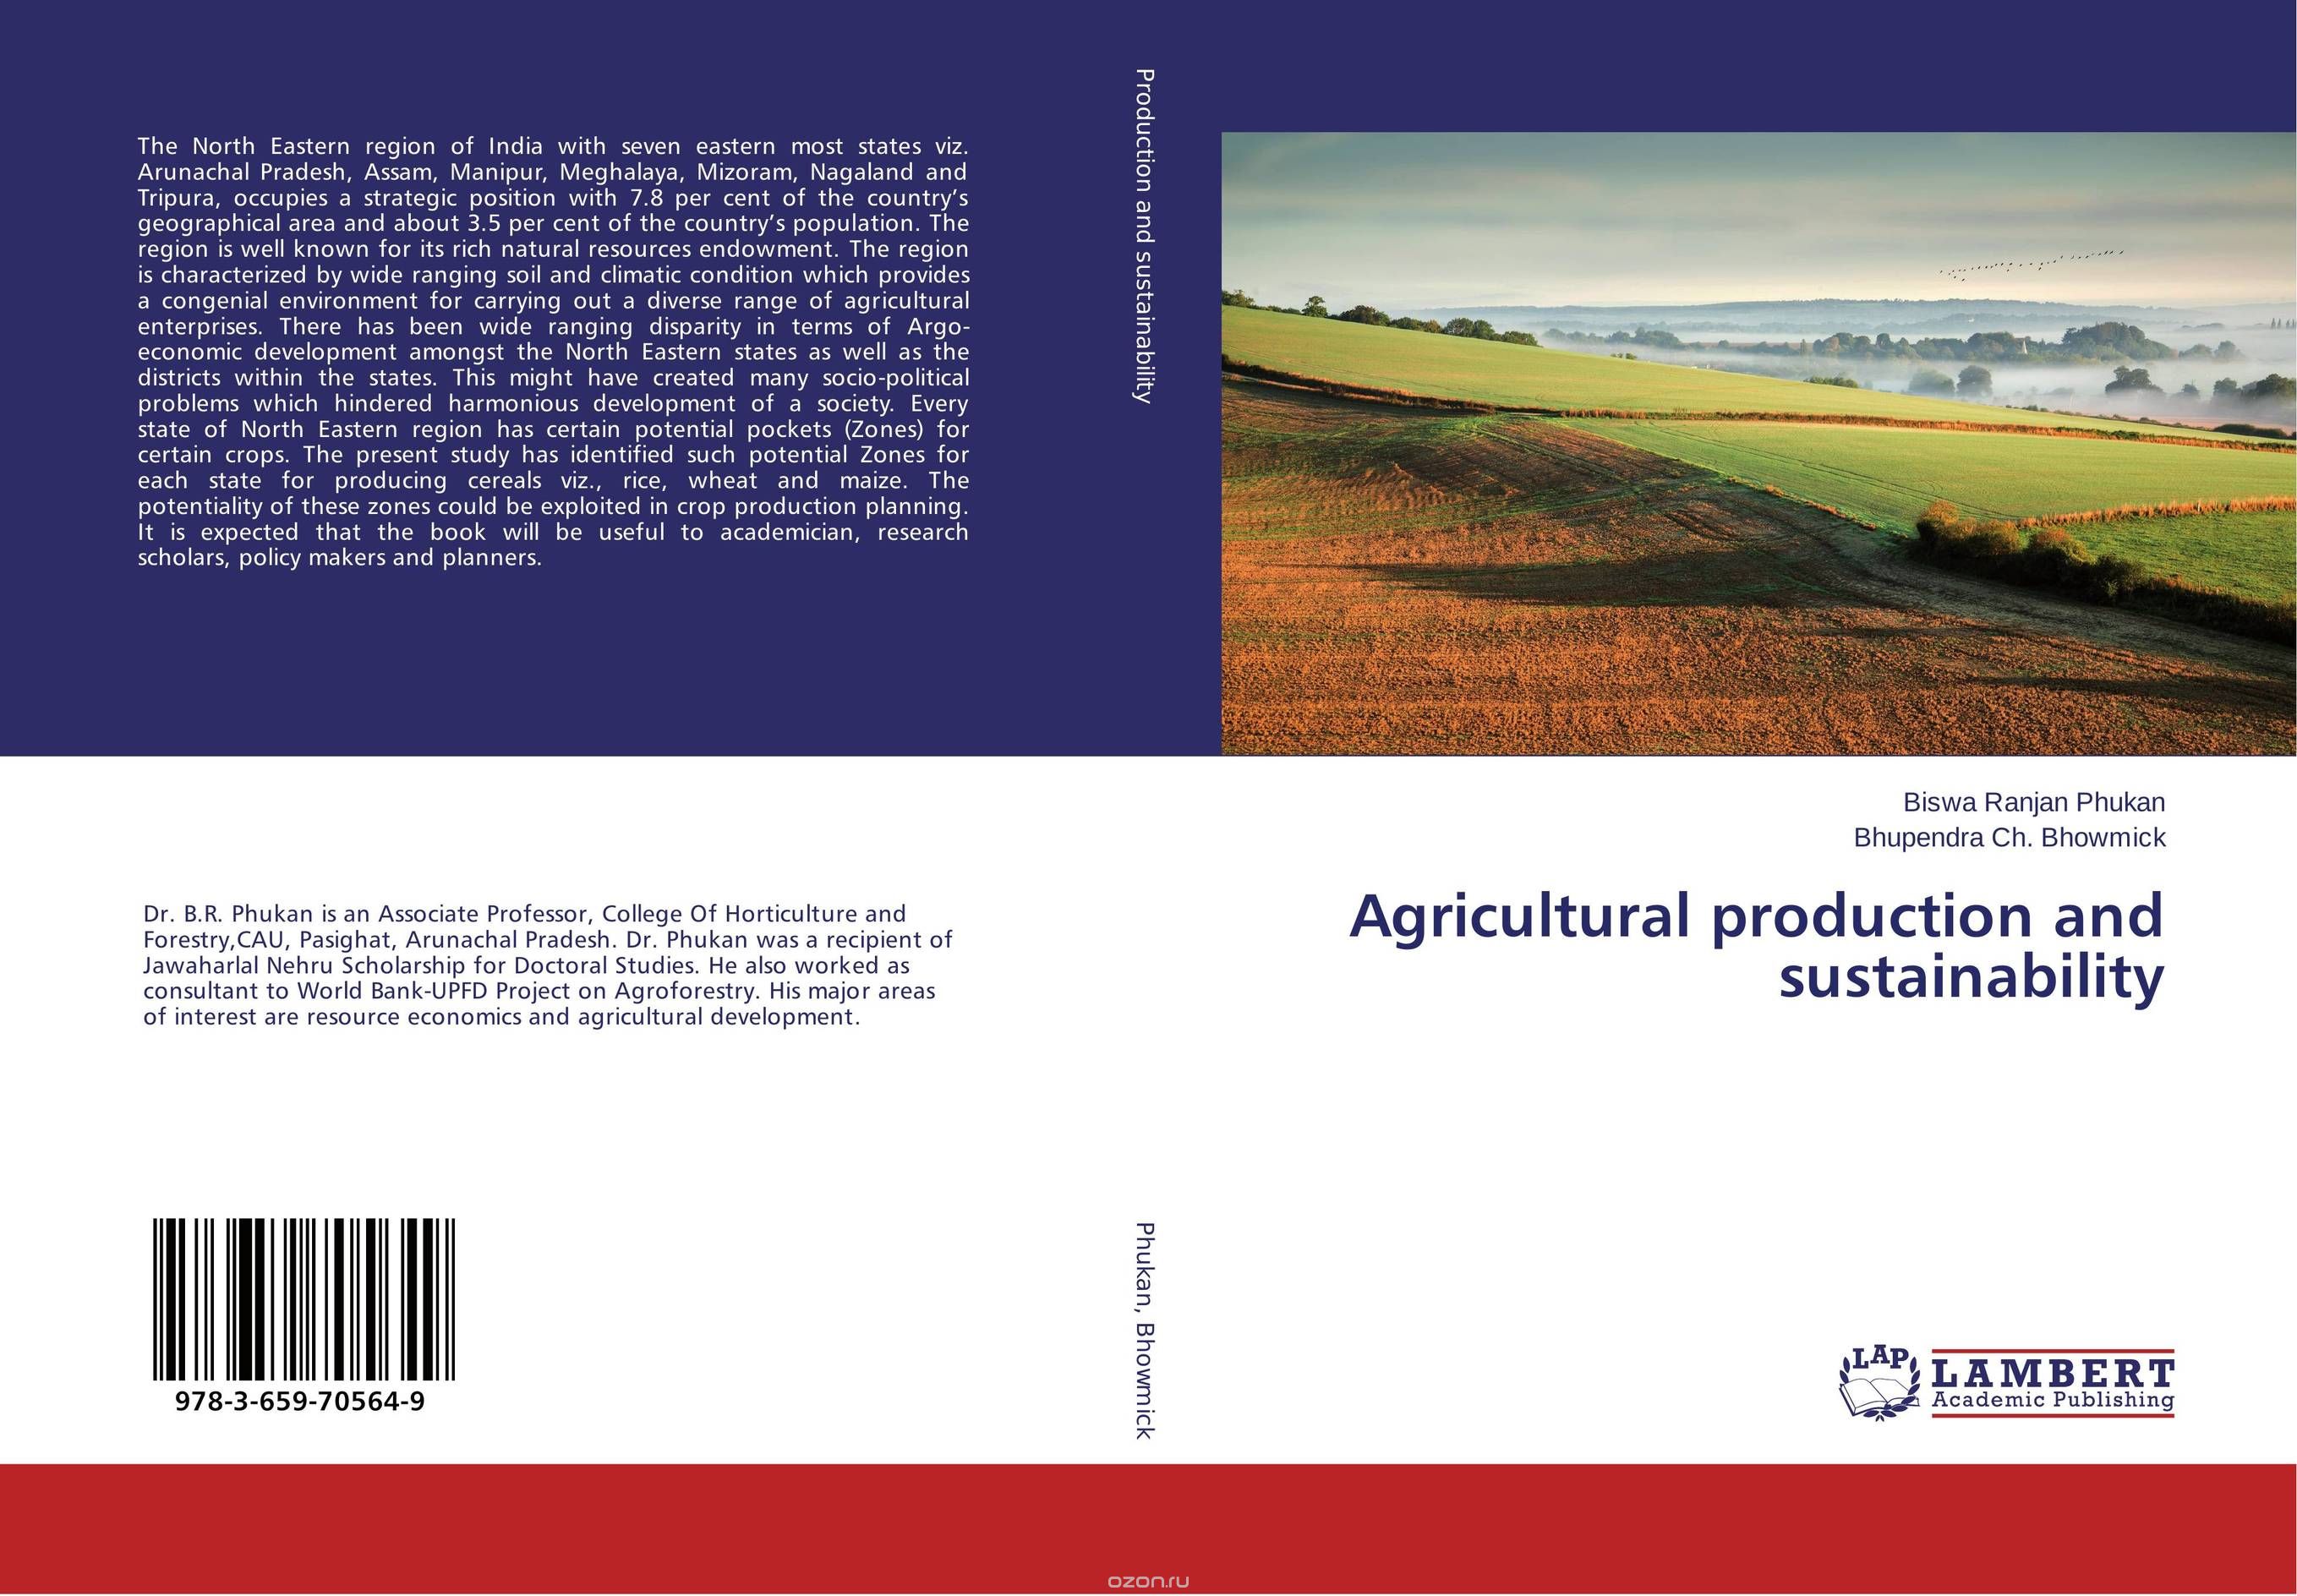 Agricultural production and sustainability